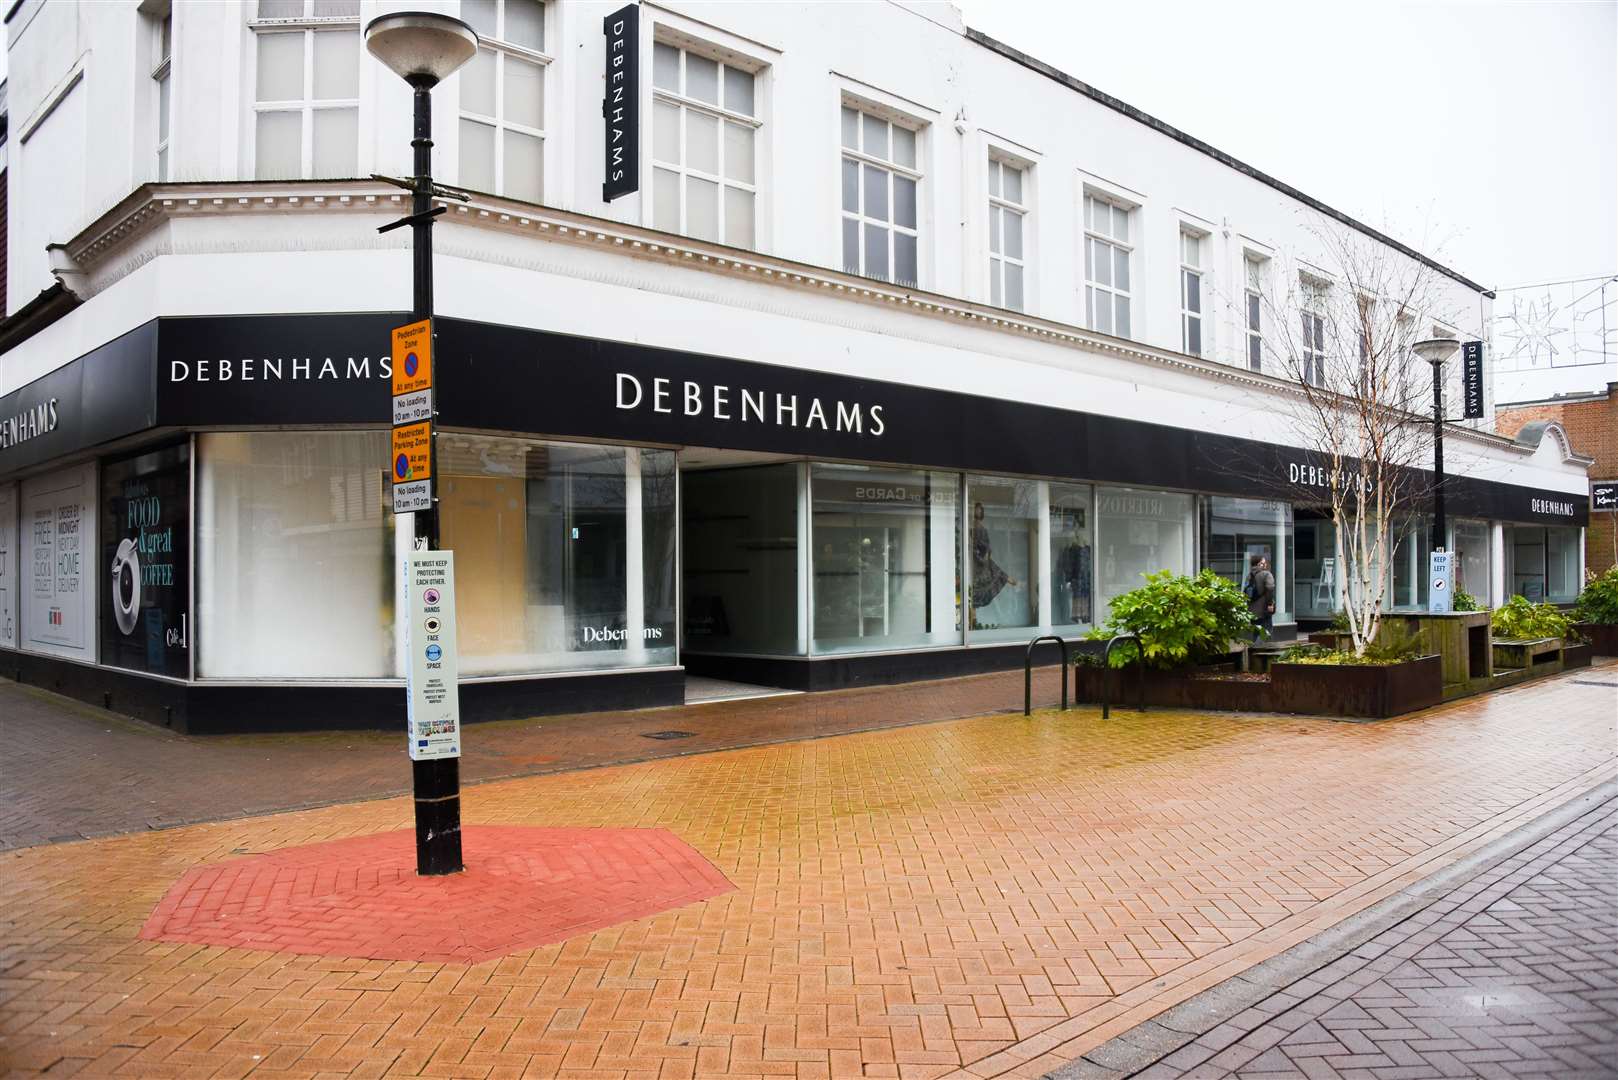 Plans have been unveiled for the former Debenhams store. Picture: Ian Burt